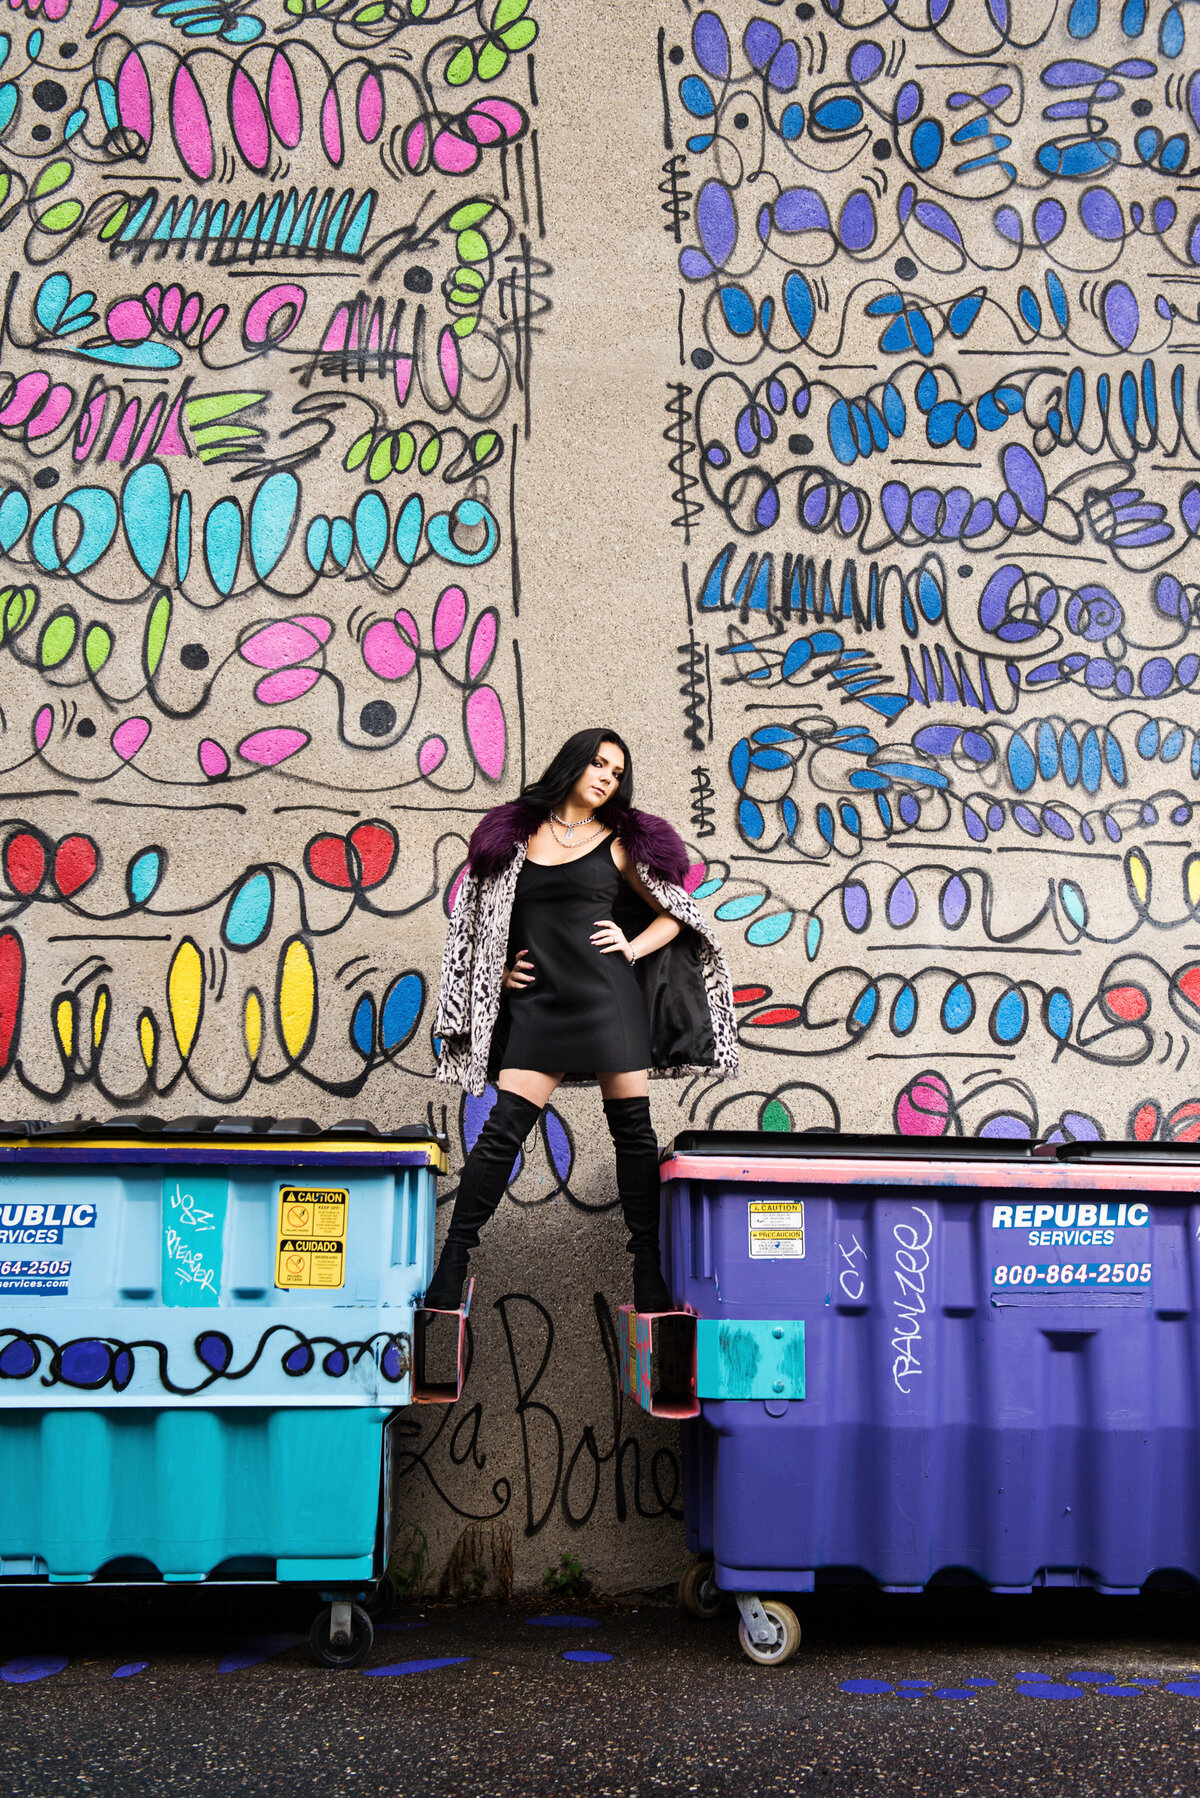 high school senior girl in little black dress and tall boots standing on dumpster